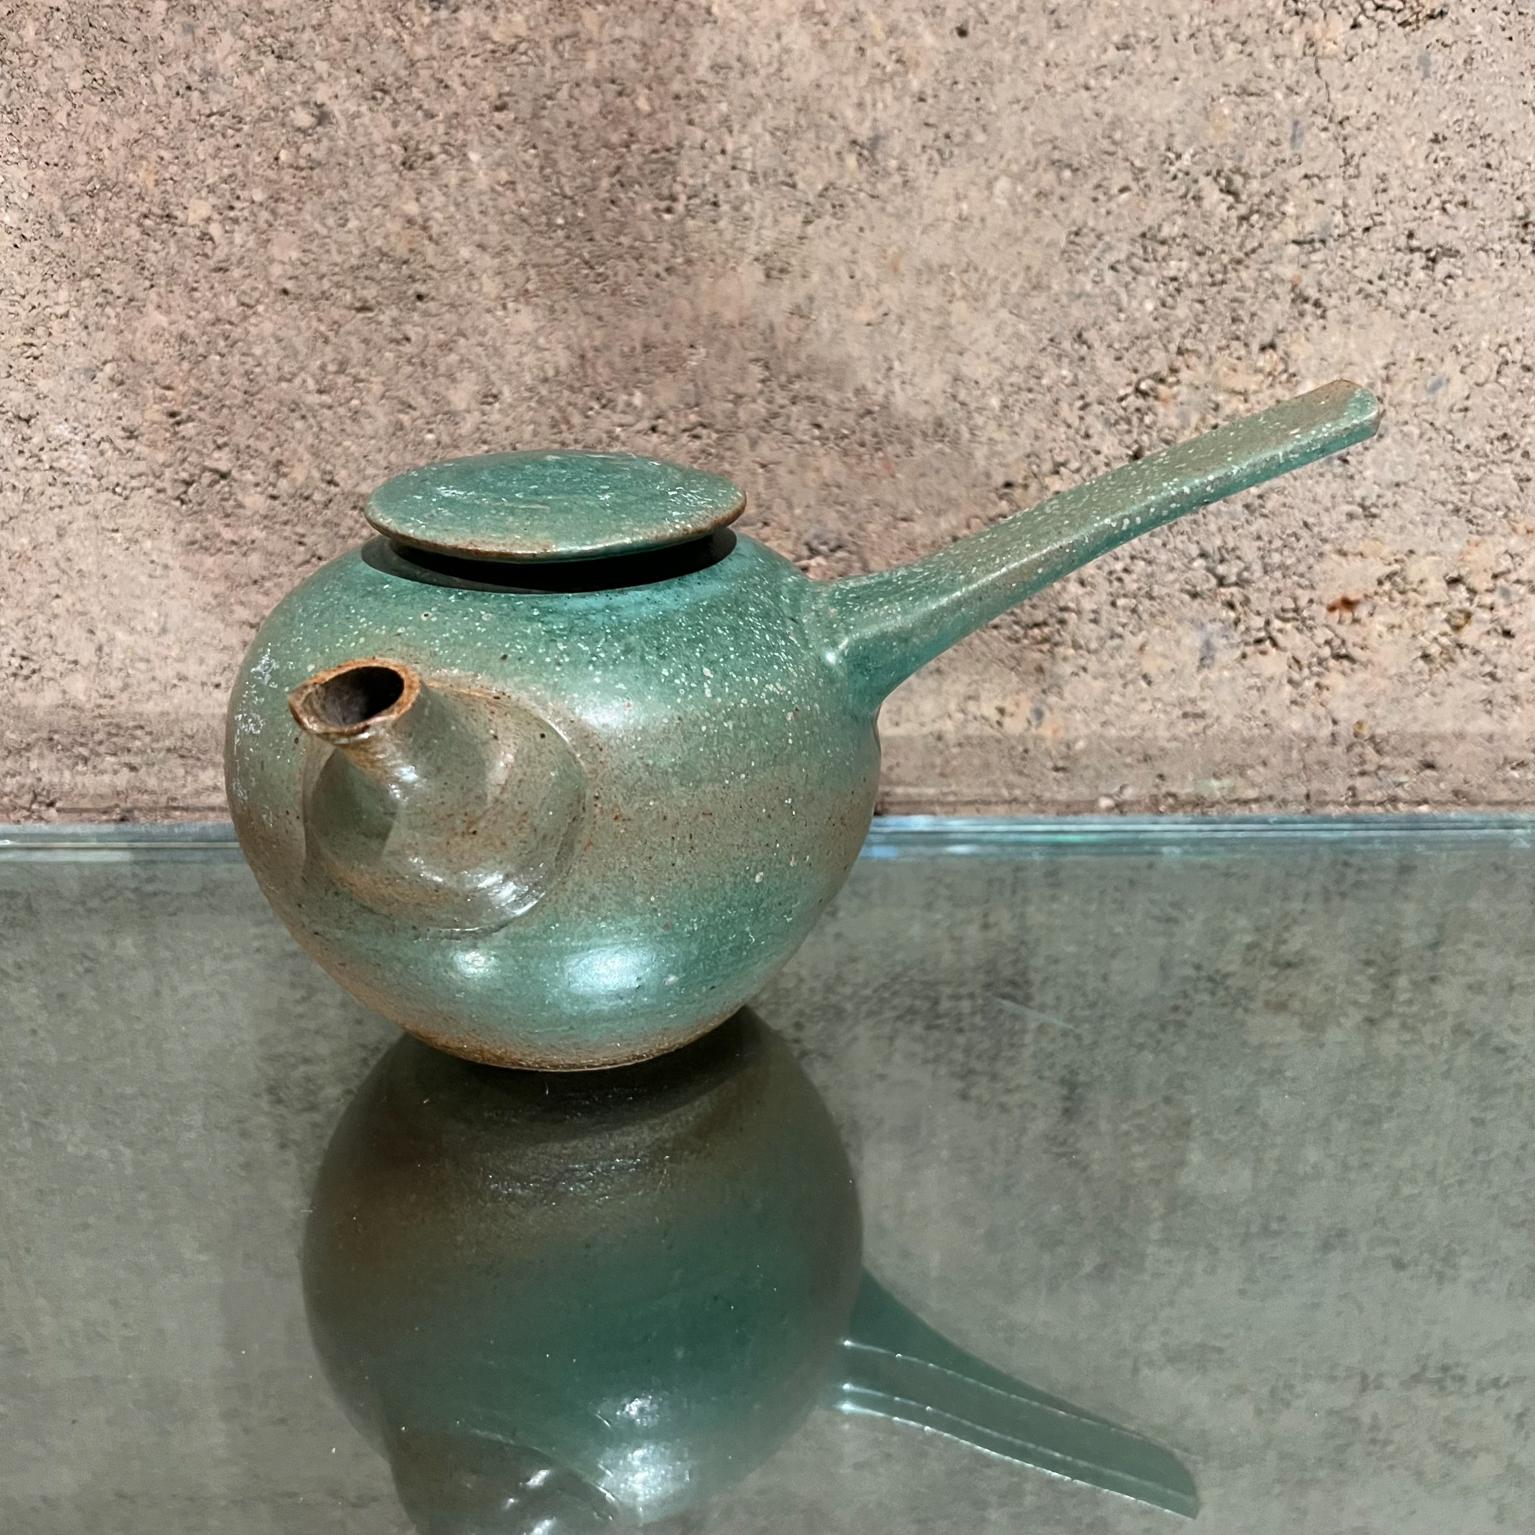 Old Art Pottery Japanese Modern Green Tea Pot 
Artist signed
5 tall x 6 d x 8.5 w
Original preowned condition. Distress crack present.
Please see all images.
